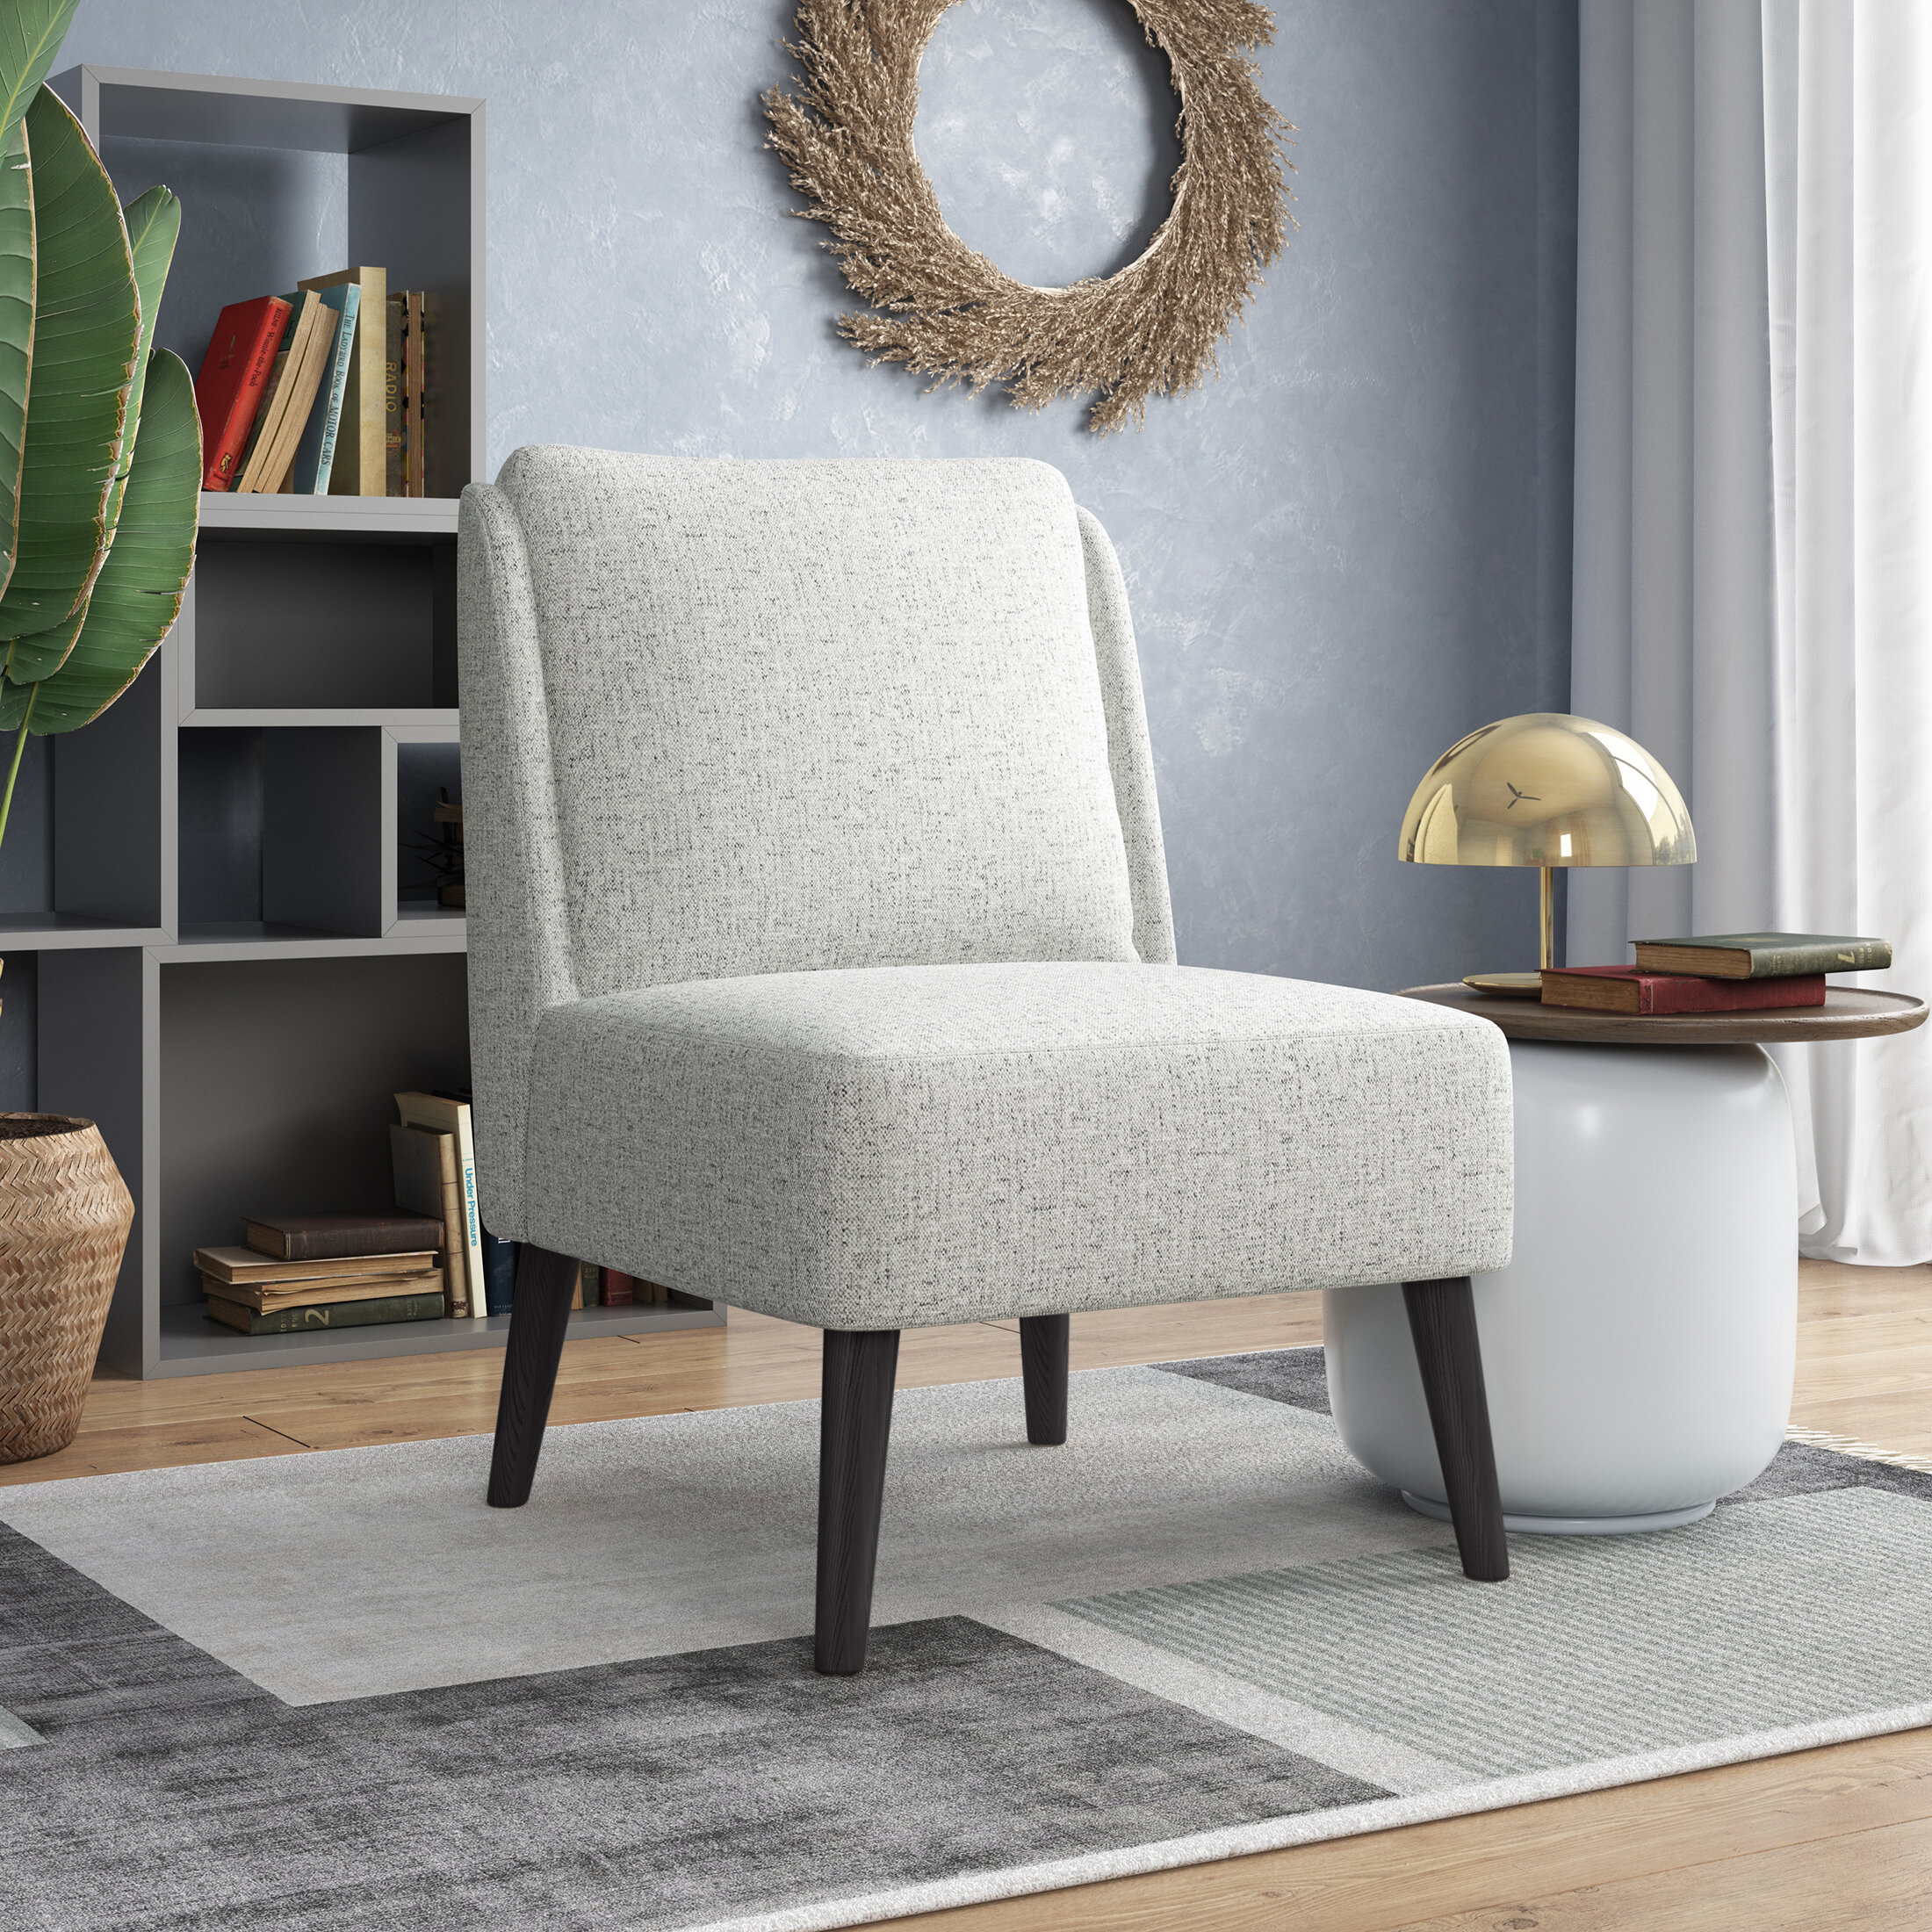 Corner Side Chair Living Room Furniture Grey Modern Fabric Armless Accent Chair Decorative Slipper Chair Vanity Chair for Bedroom Desk 1, Grey